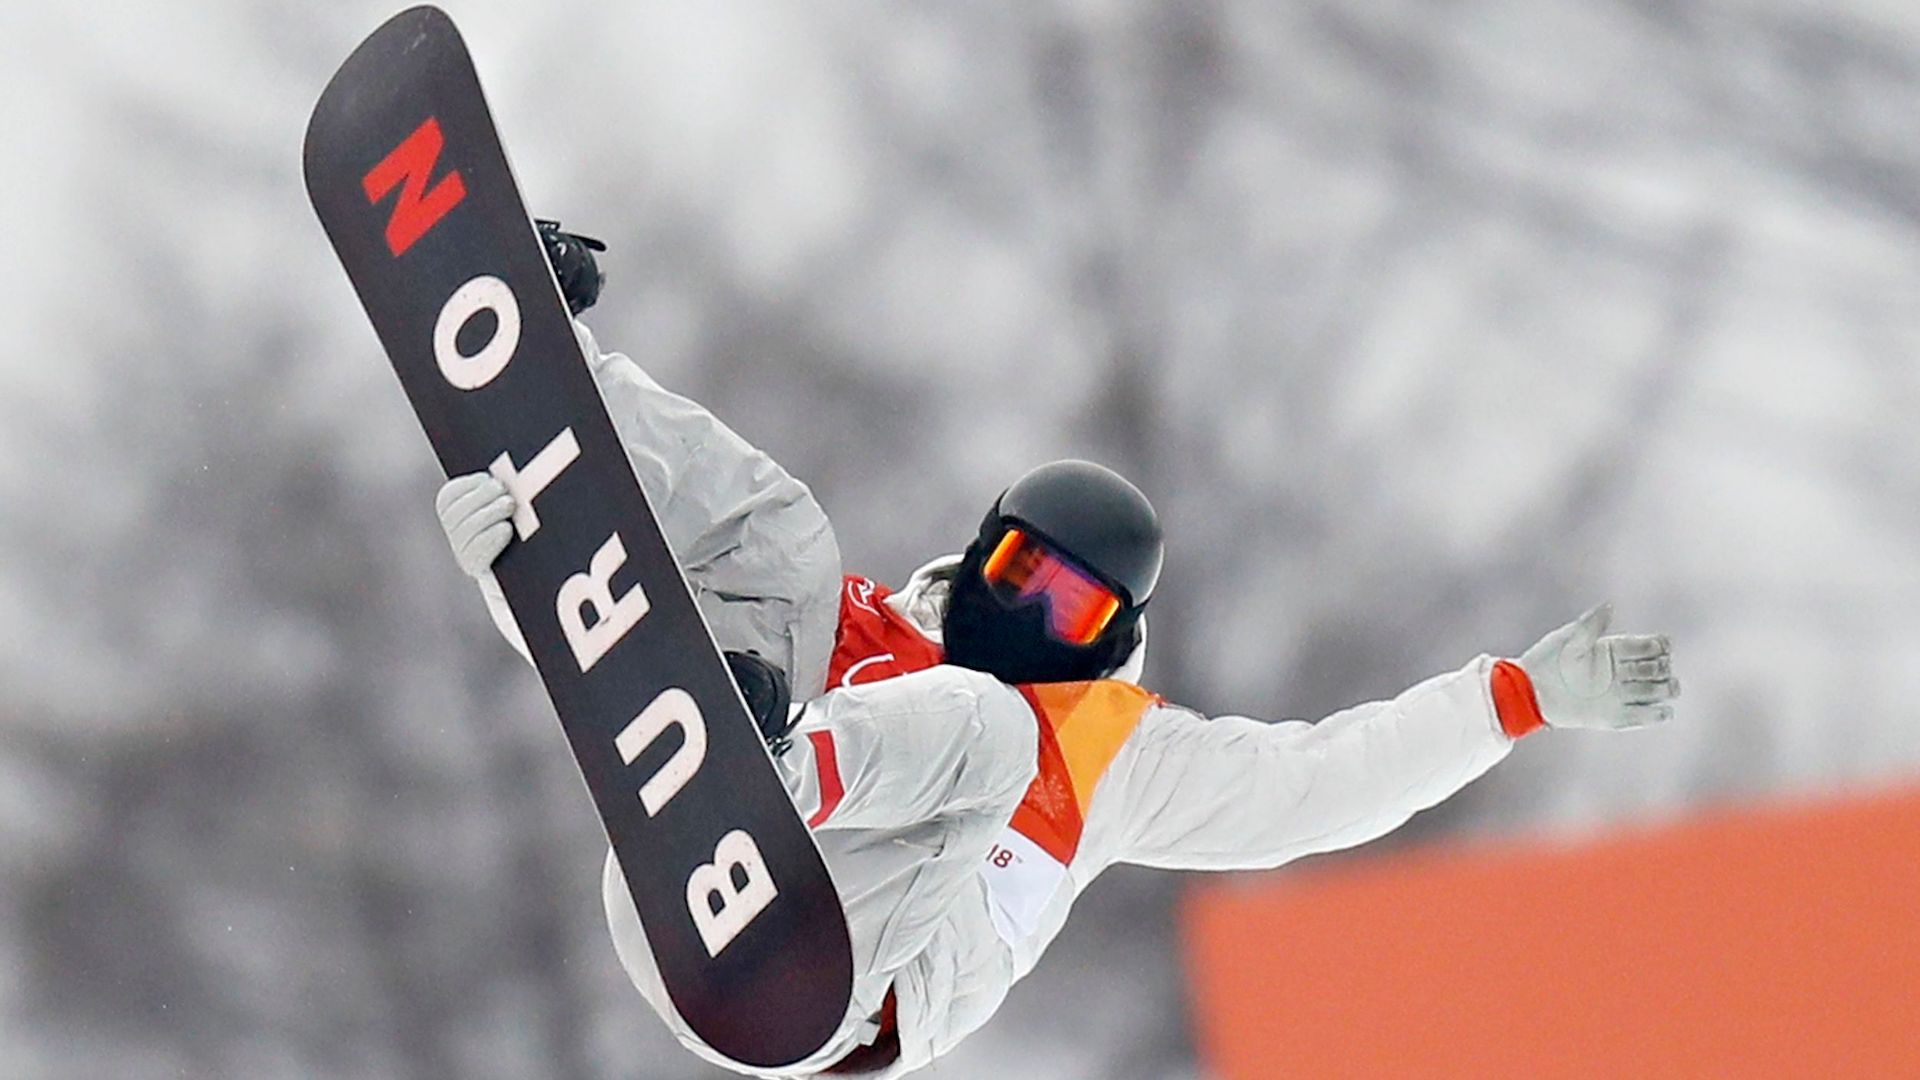 Shaun White proves he's greatest snowboarder ever, winning third career  gold medal - The Washington Post